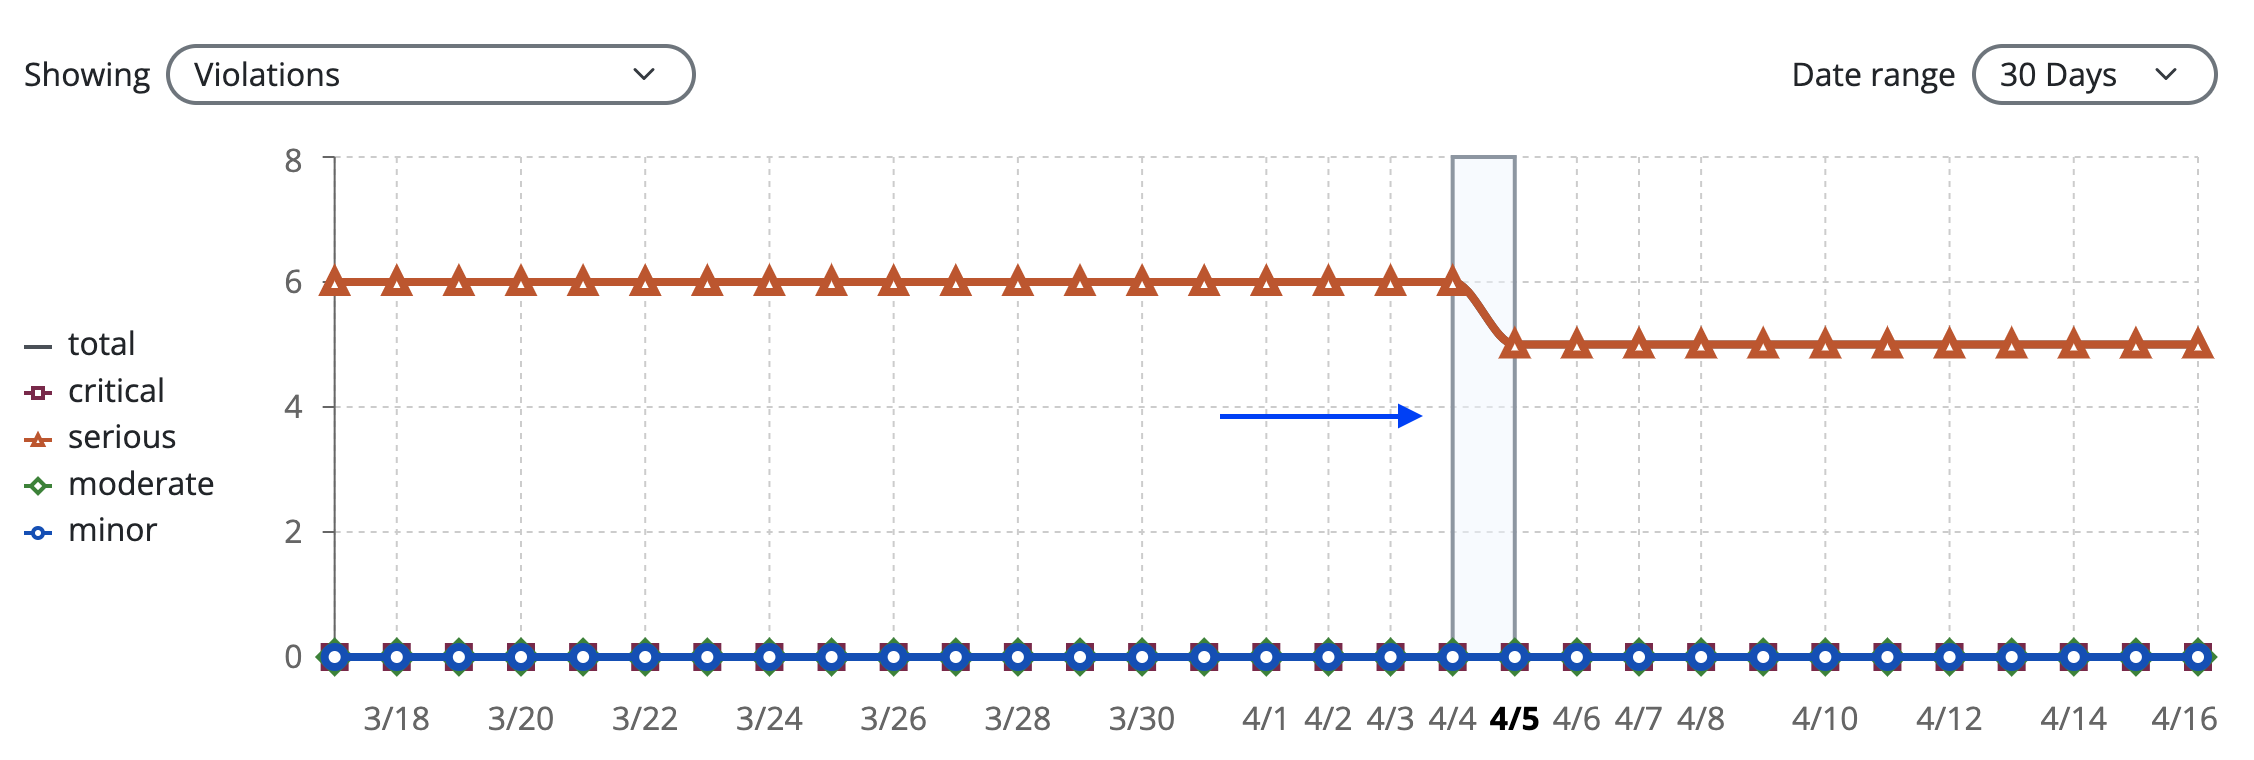 A website's 30 day violation history on a chart. The date range from 4/4 to 4/5 is highlighted in blue.